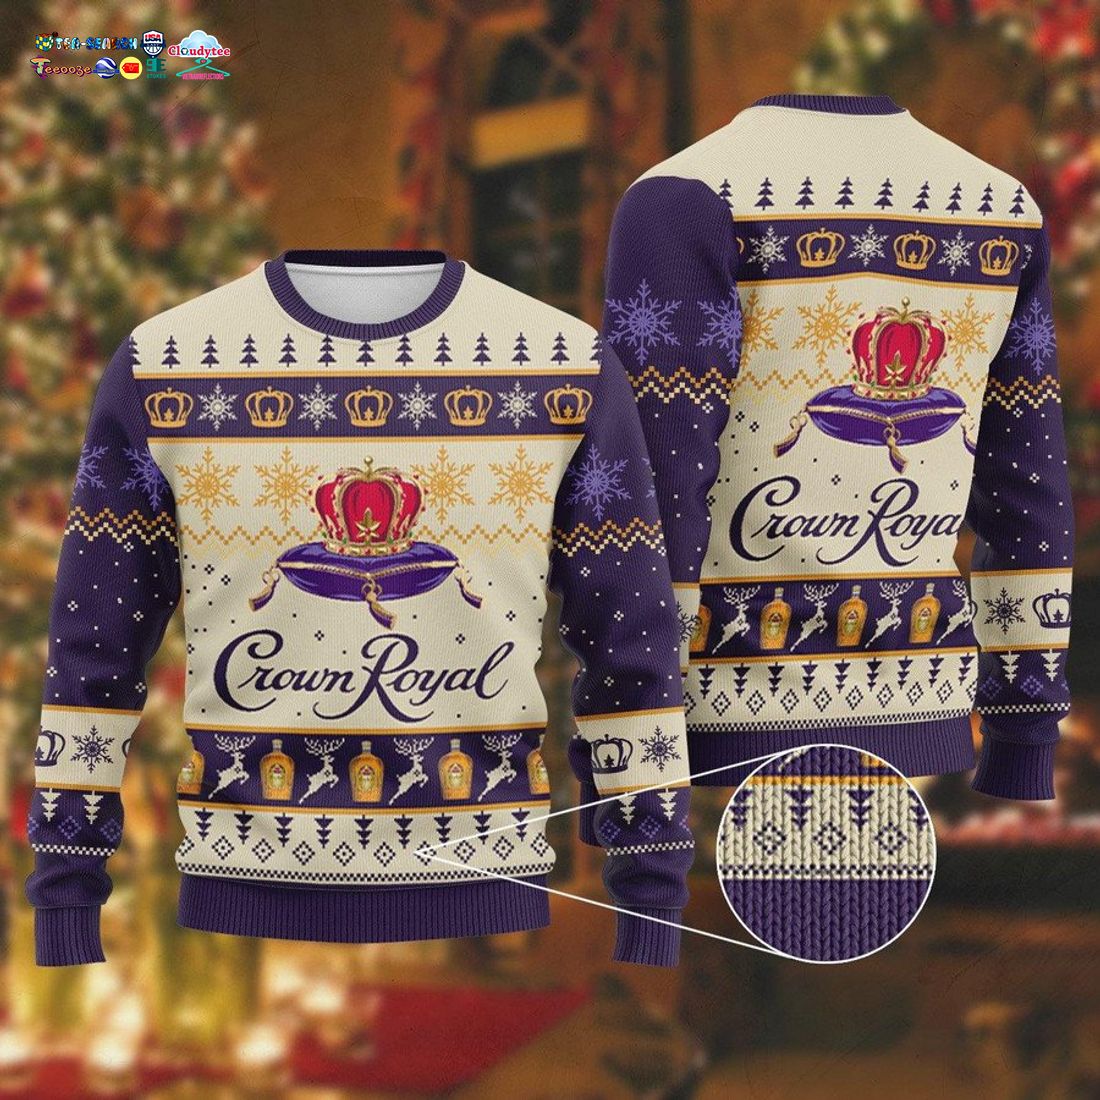 Crown Royal Purple Ugly Christmas Sweater - Beauty queen